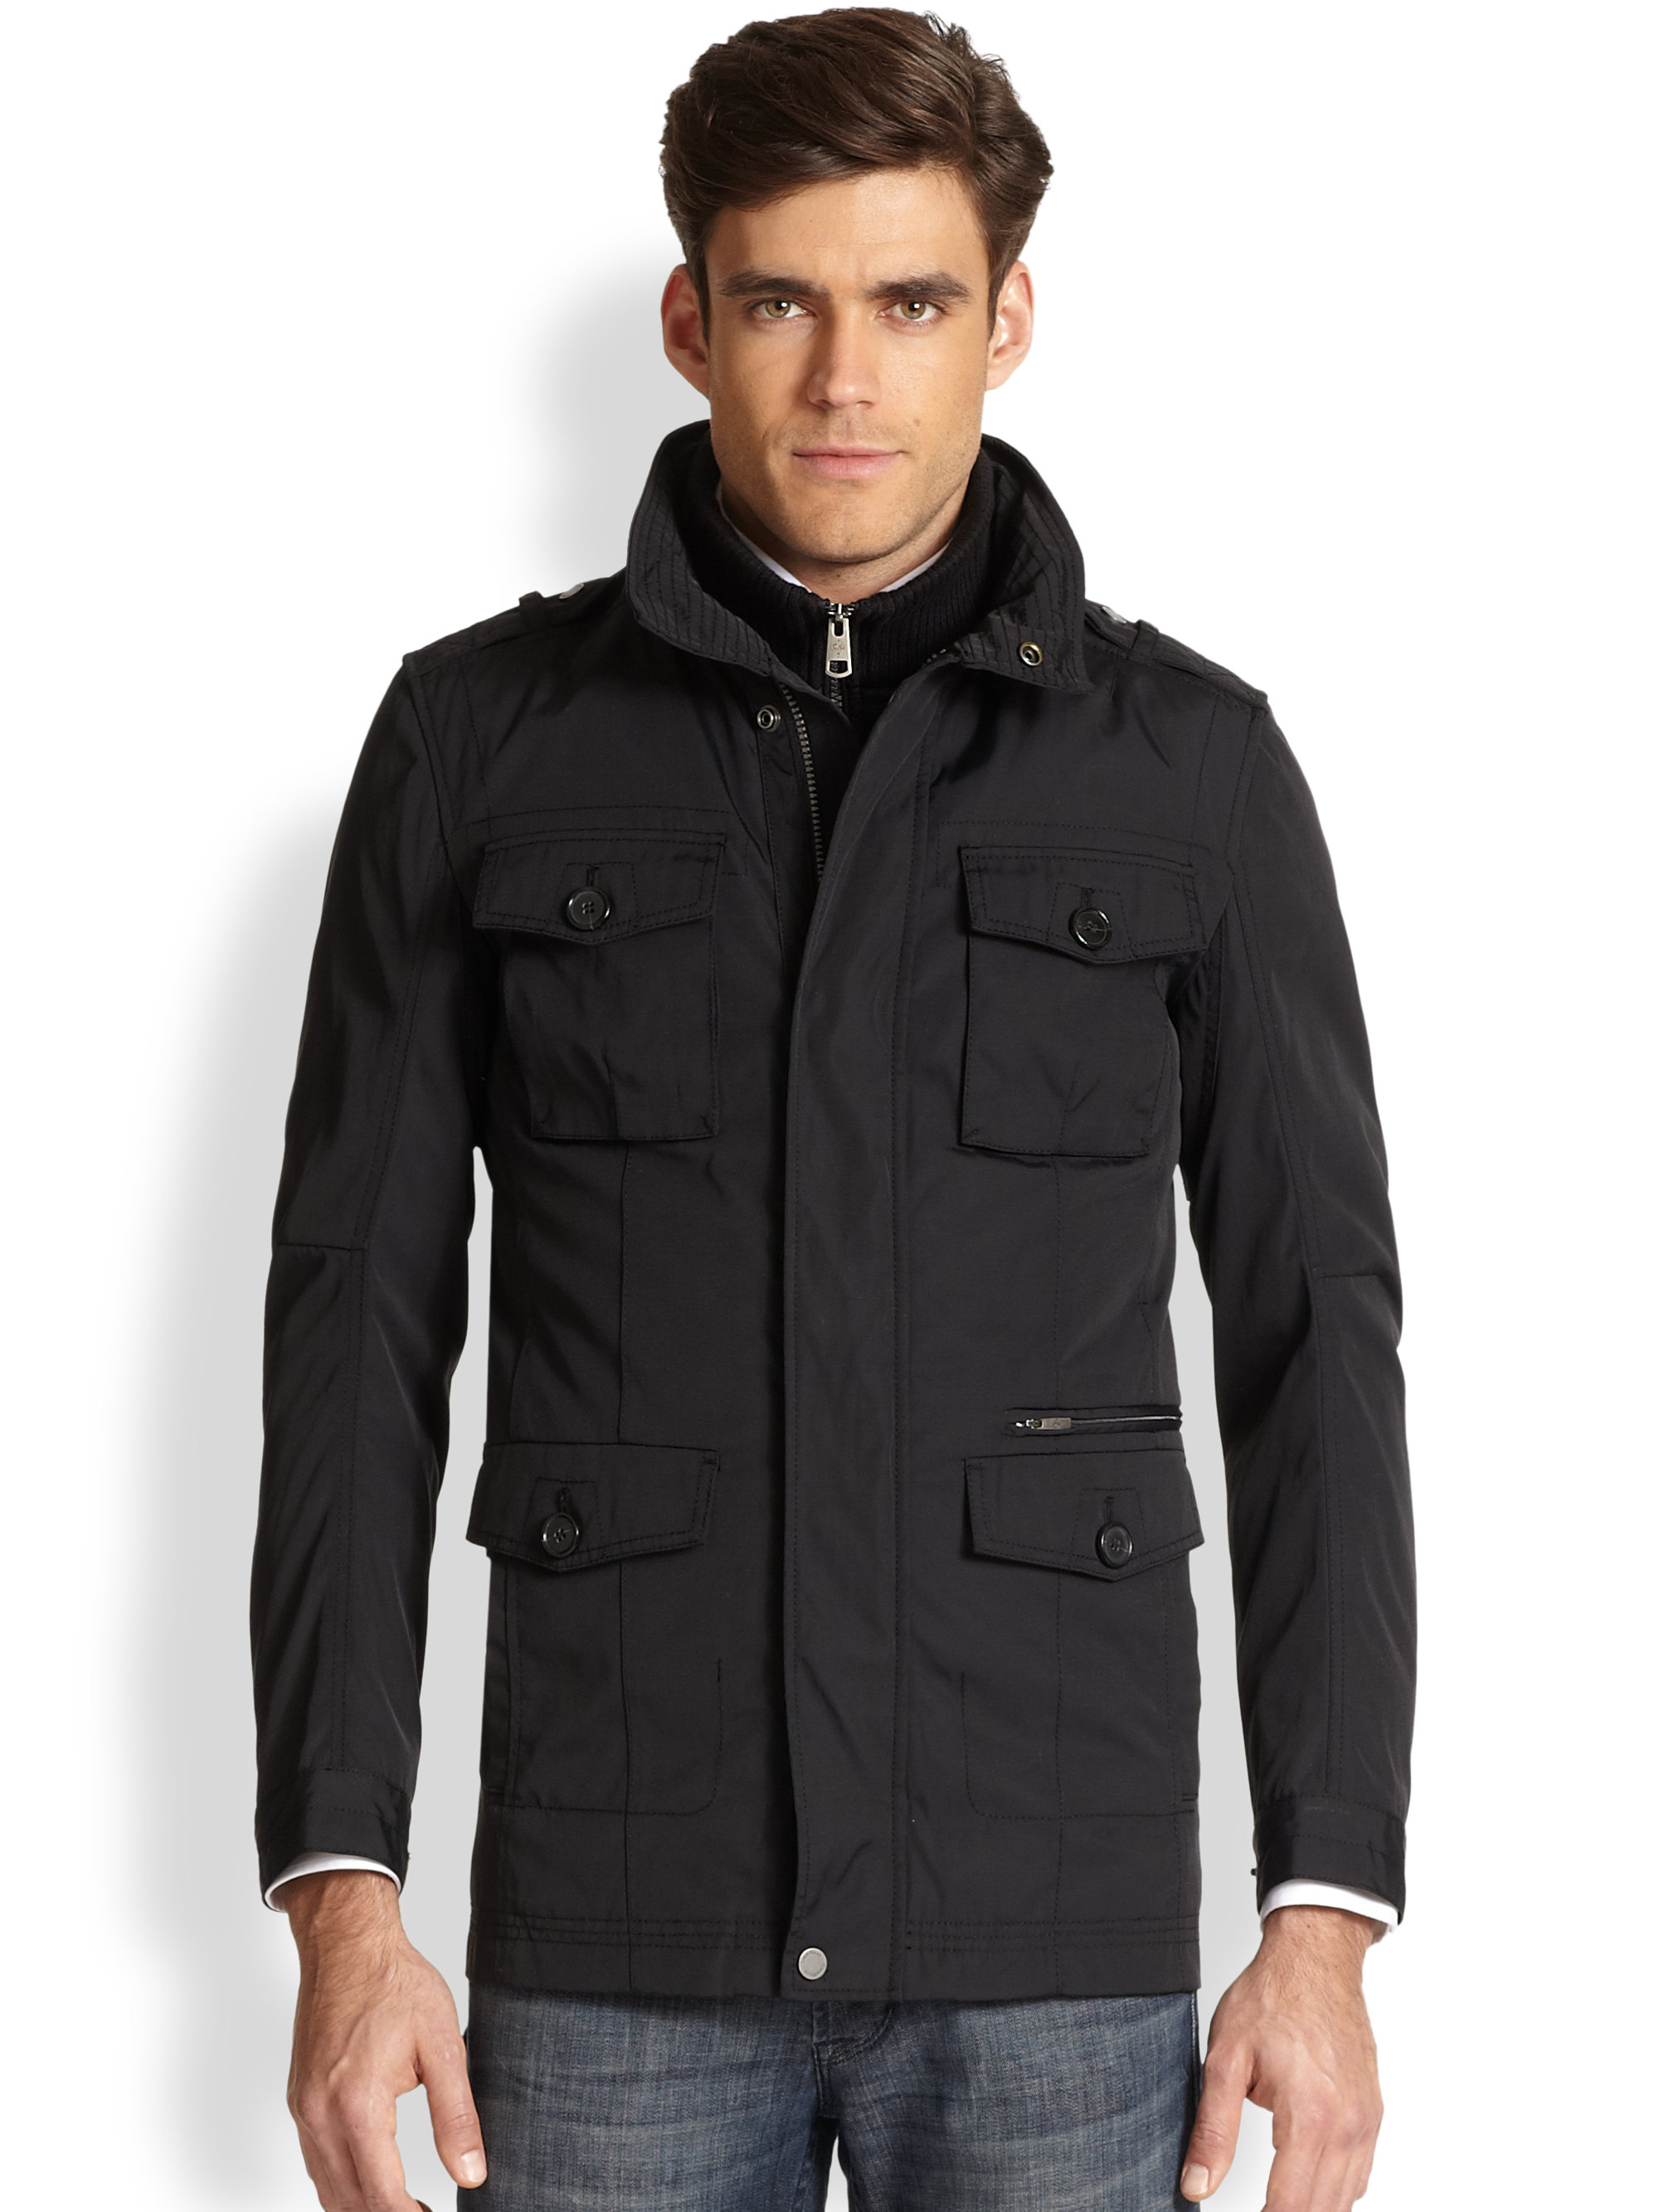 Lyst - Cole Haan Oxford Utility Jacket in Black for Men